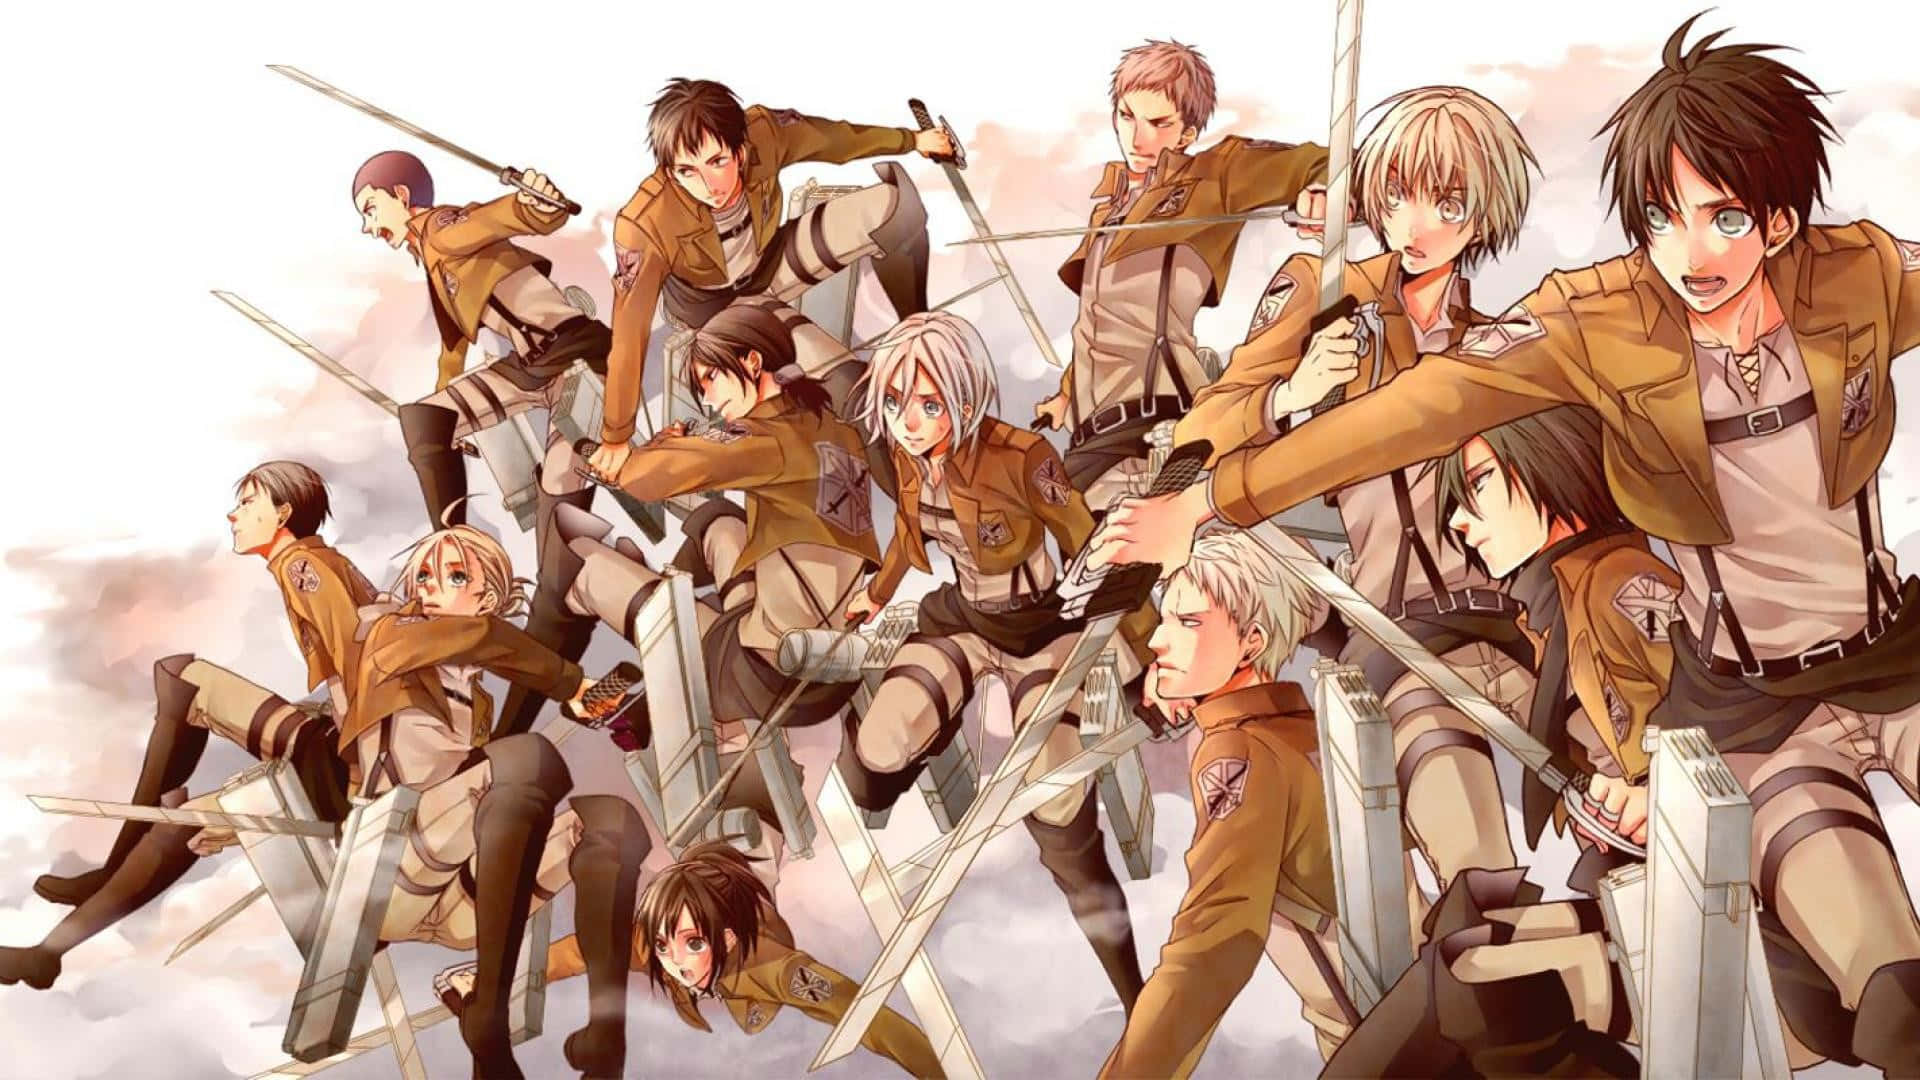 “Defend Humanity with Attack On Titan Video Game” Wallpaper